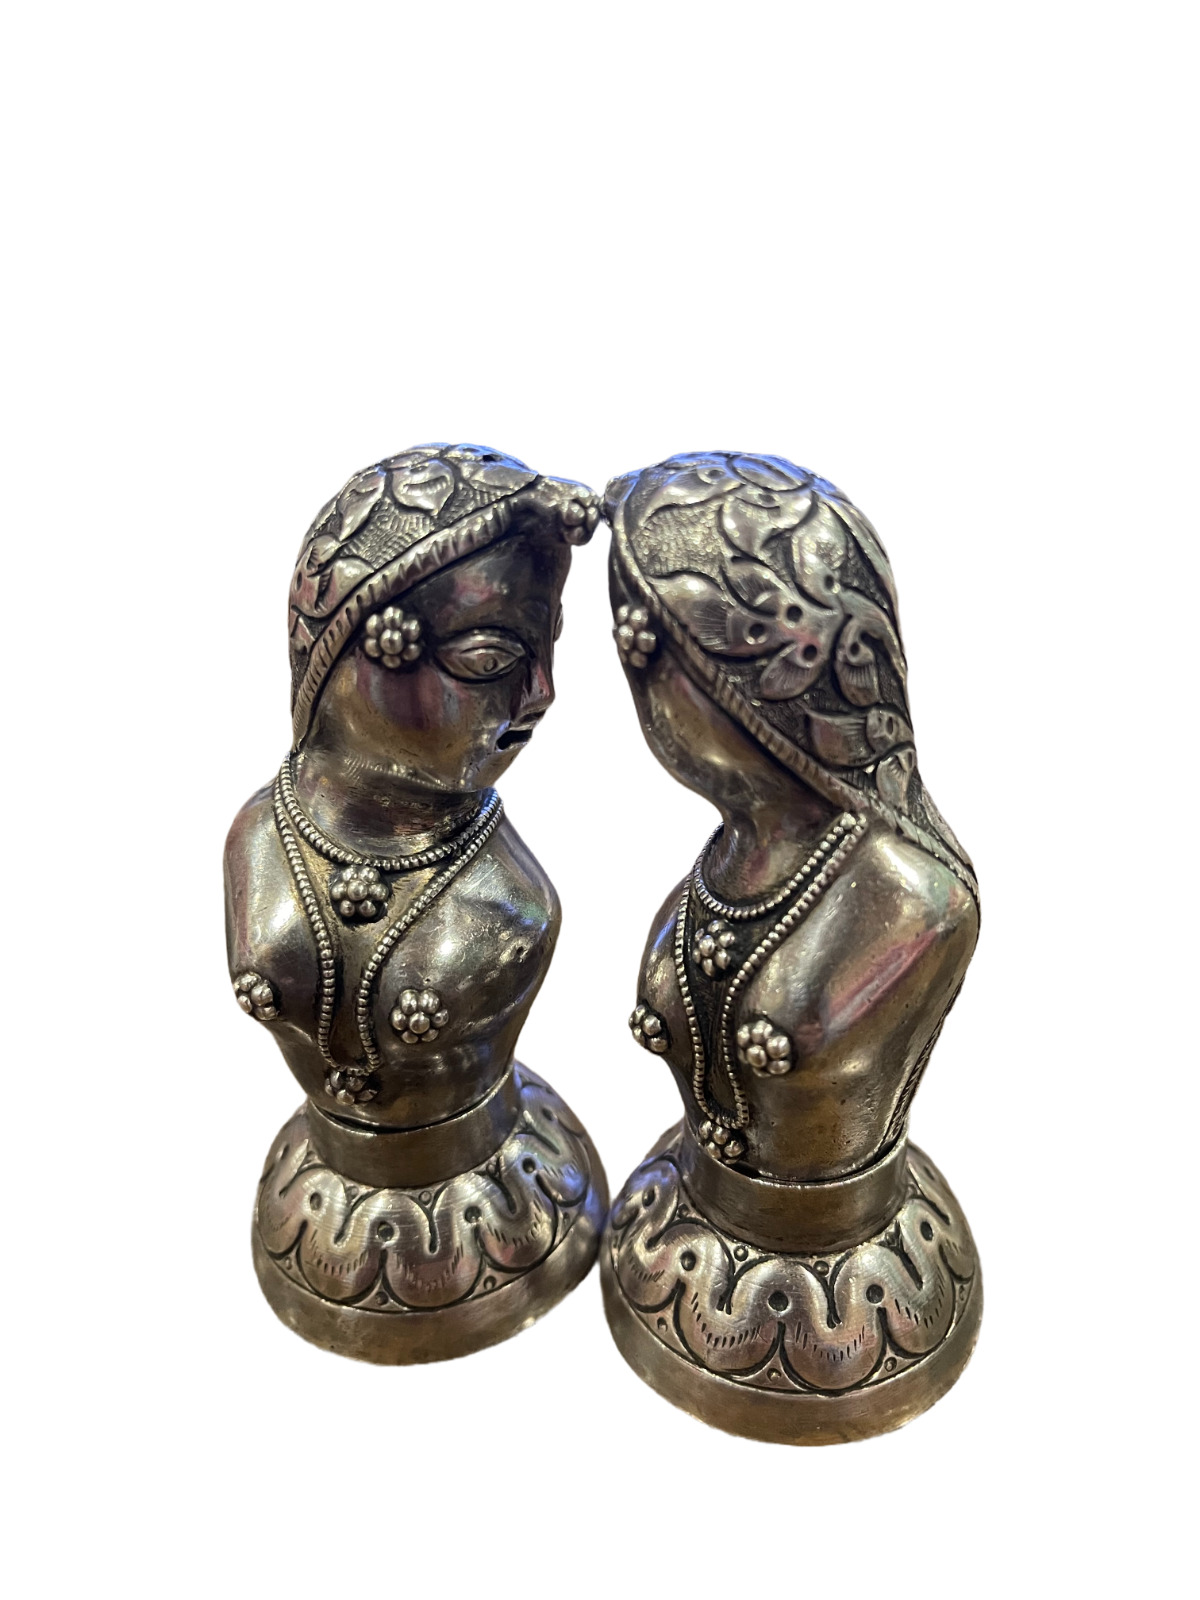 Antique Indian Sterling Silver Salt & Pepper Shakers, Figurine Maidens